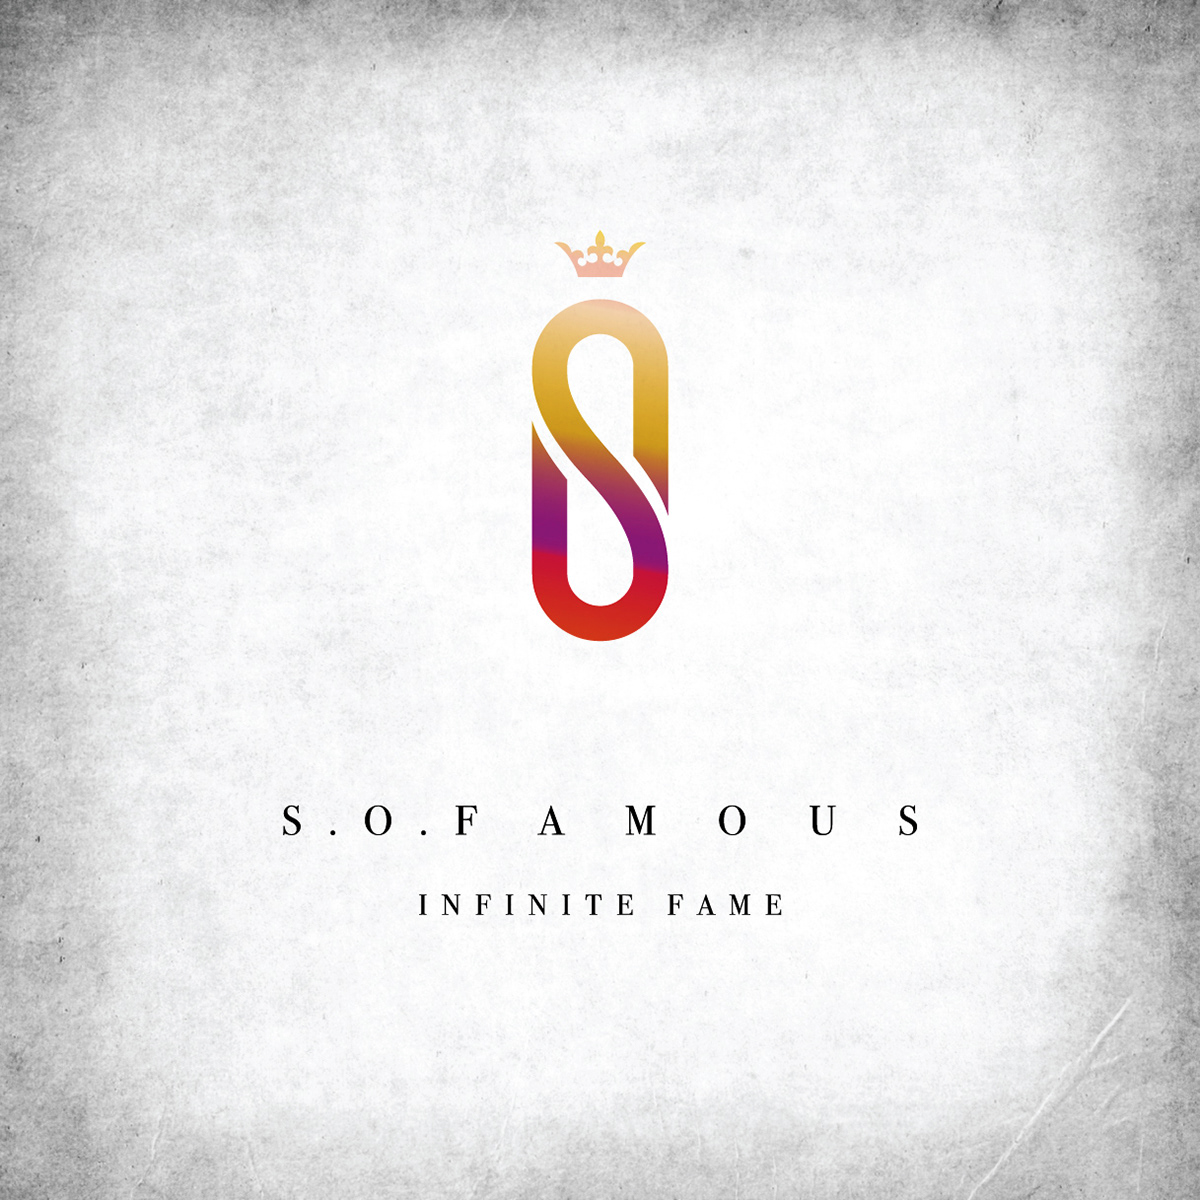 S.O.FAMOUS. Brand Creation.